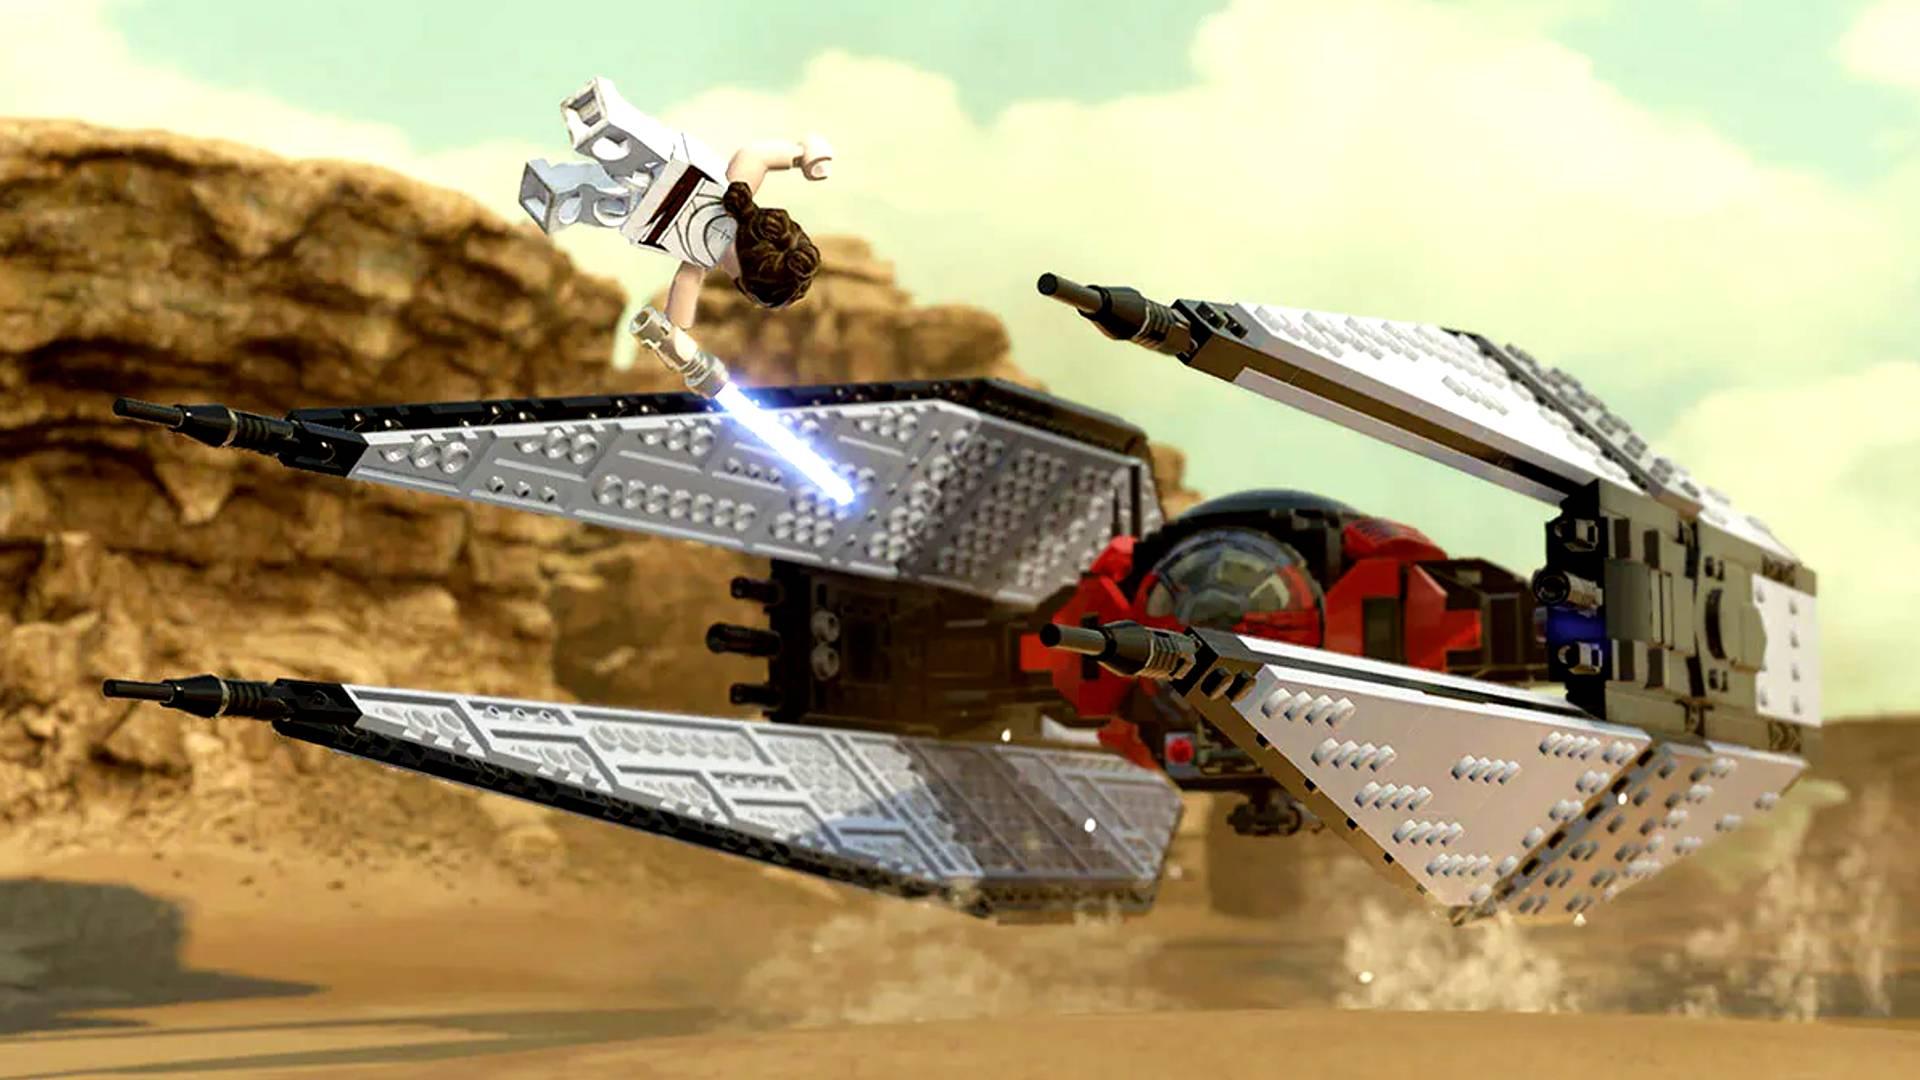 Lego Star Wars The Skywalker Saga vehicles and ships list | The Loadout